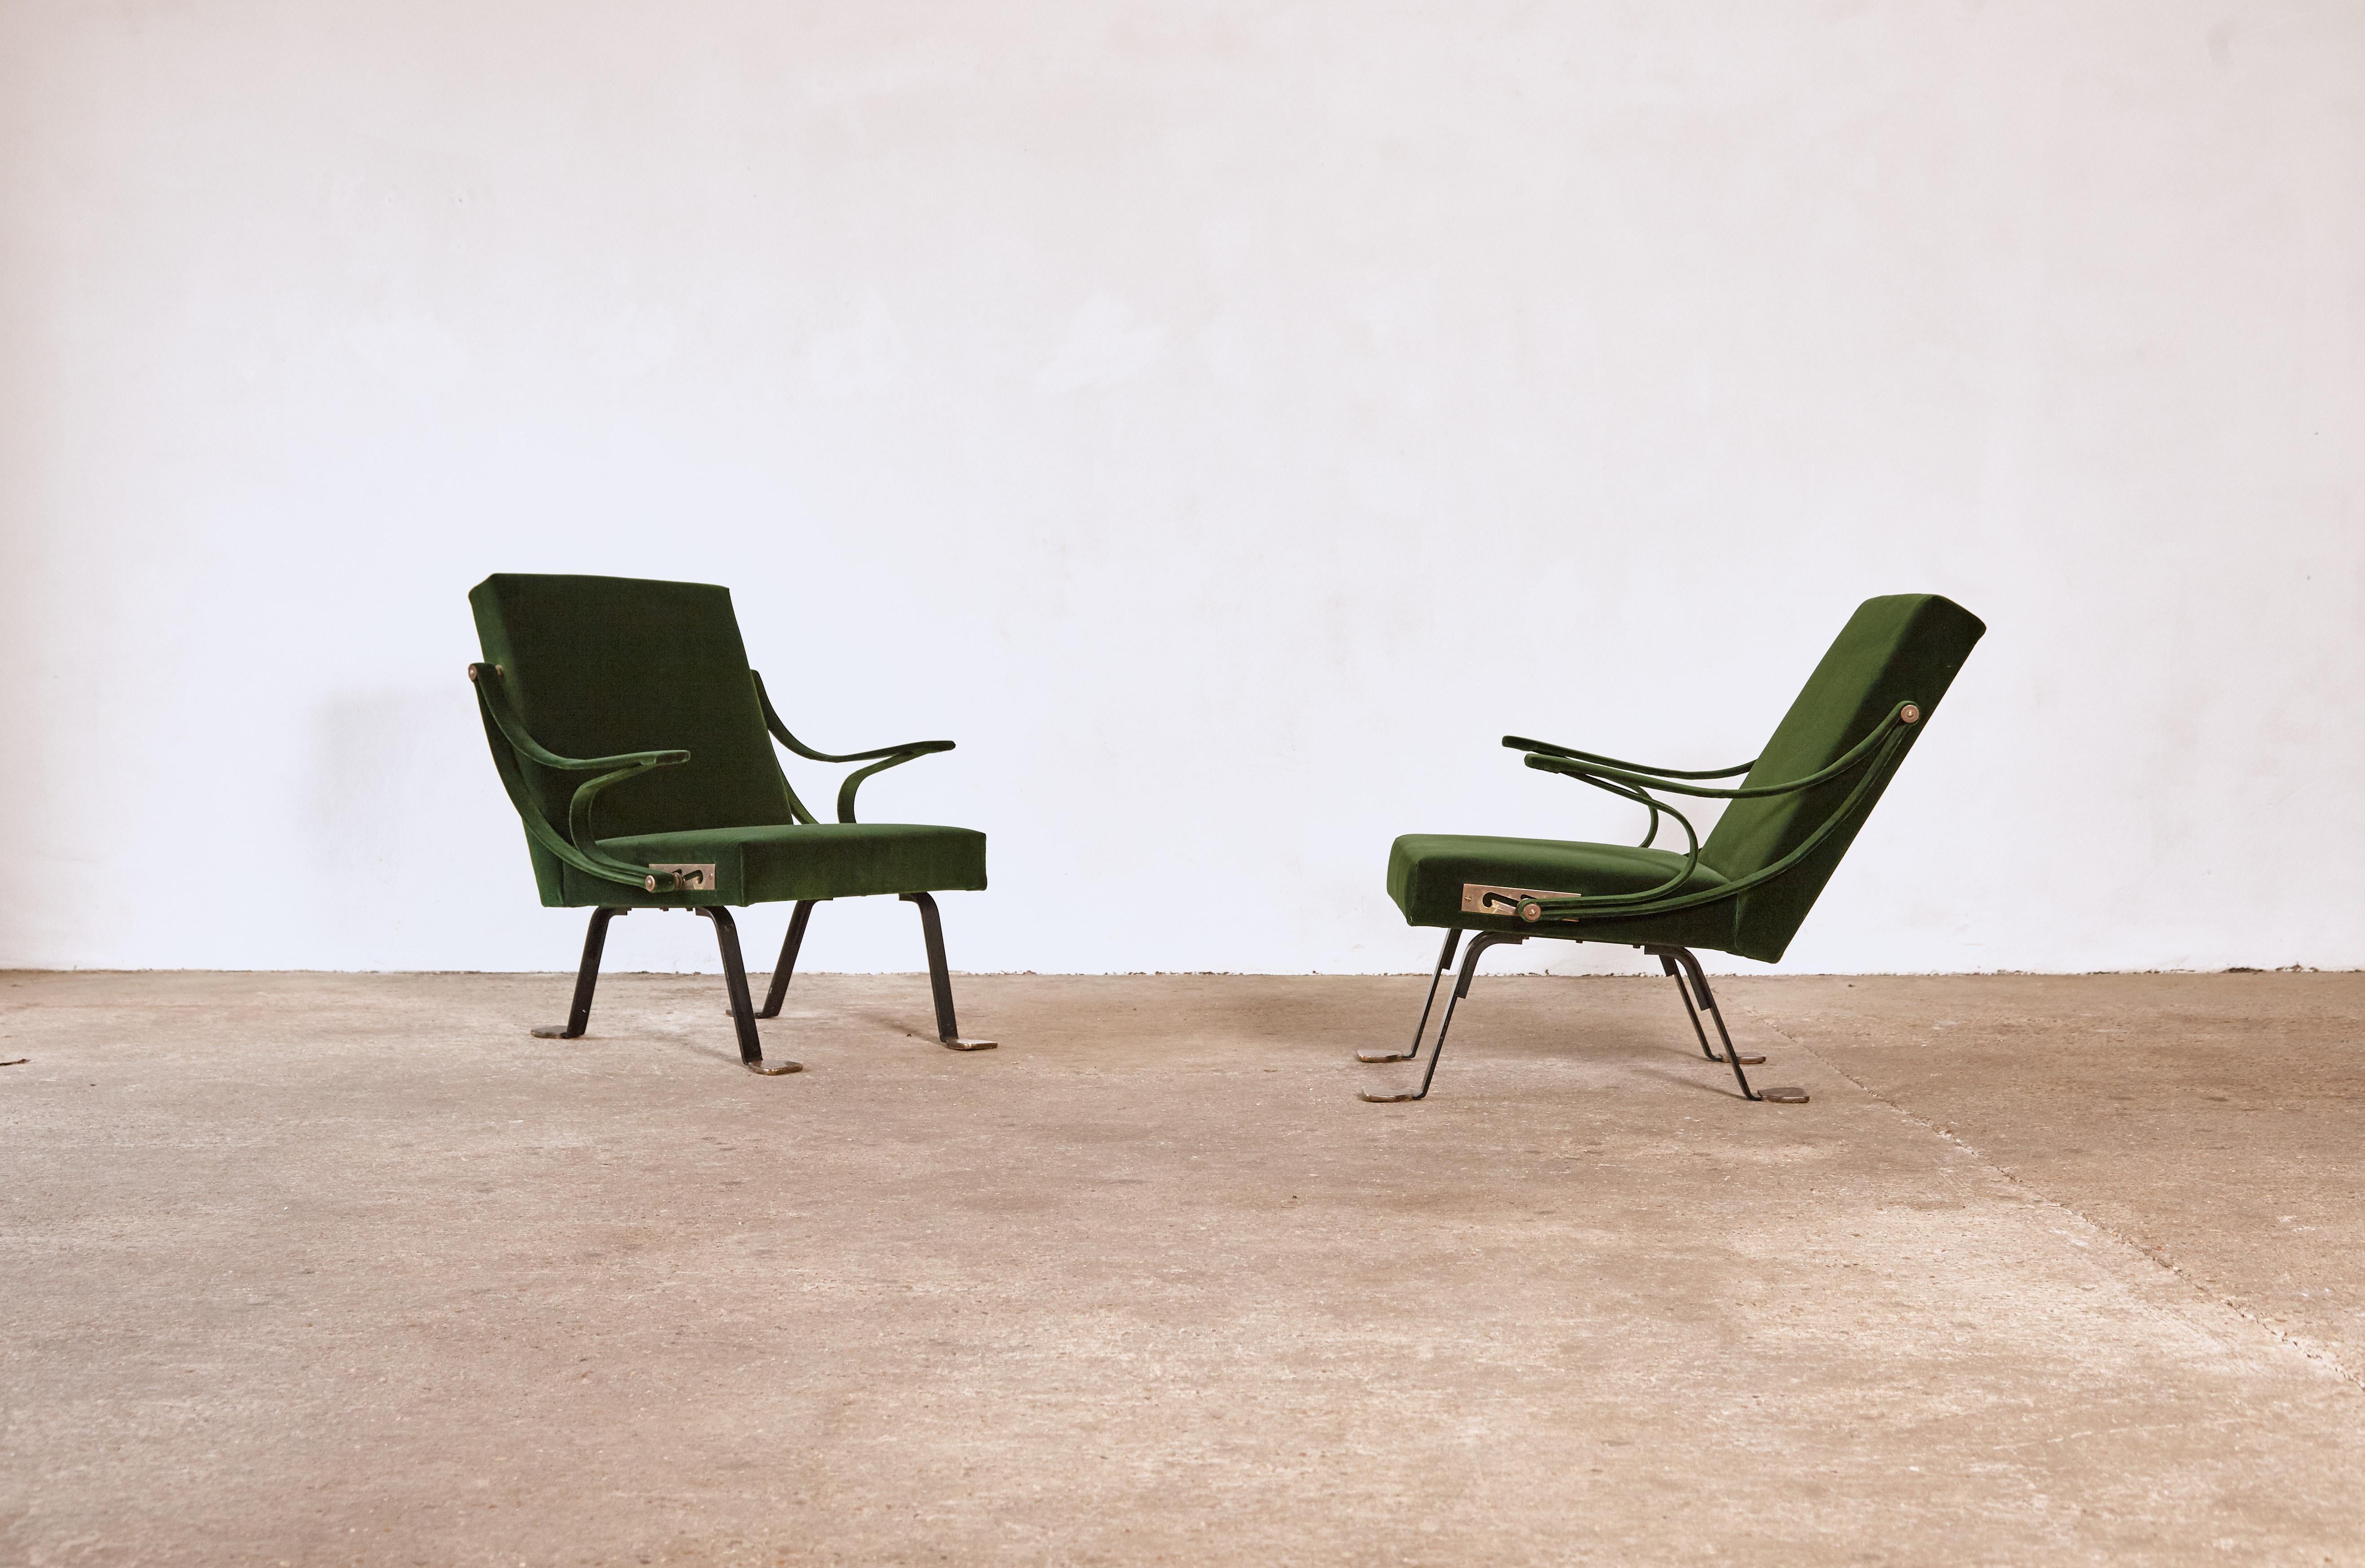 An extremely rare pair of first edition original Ignazio Gardella Reclining Digamma chairs, designed in 1957 and produced by Gavina, Bologna, Italy. Newly upholstered in dark green velvet with metal frame with patinated brass feet. The first edition